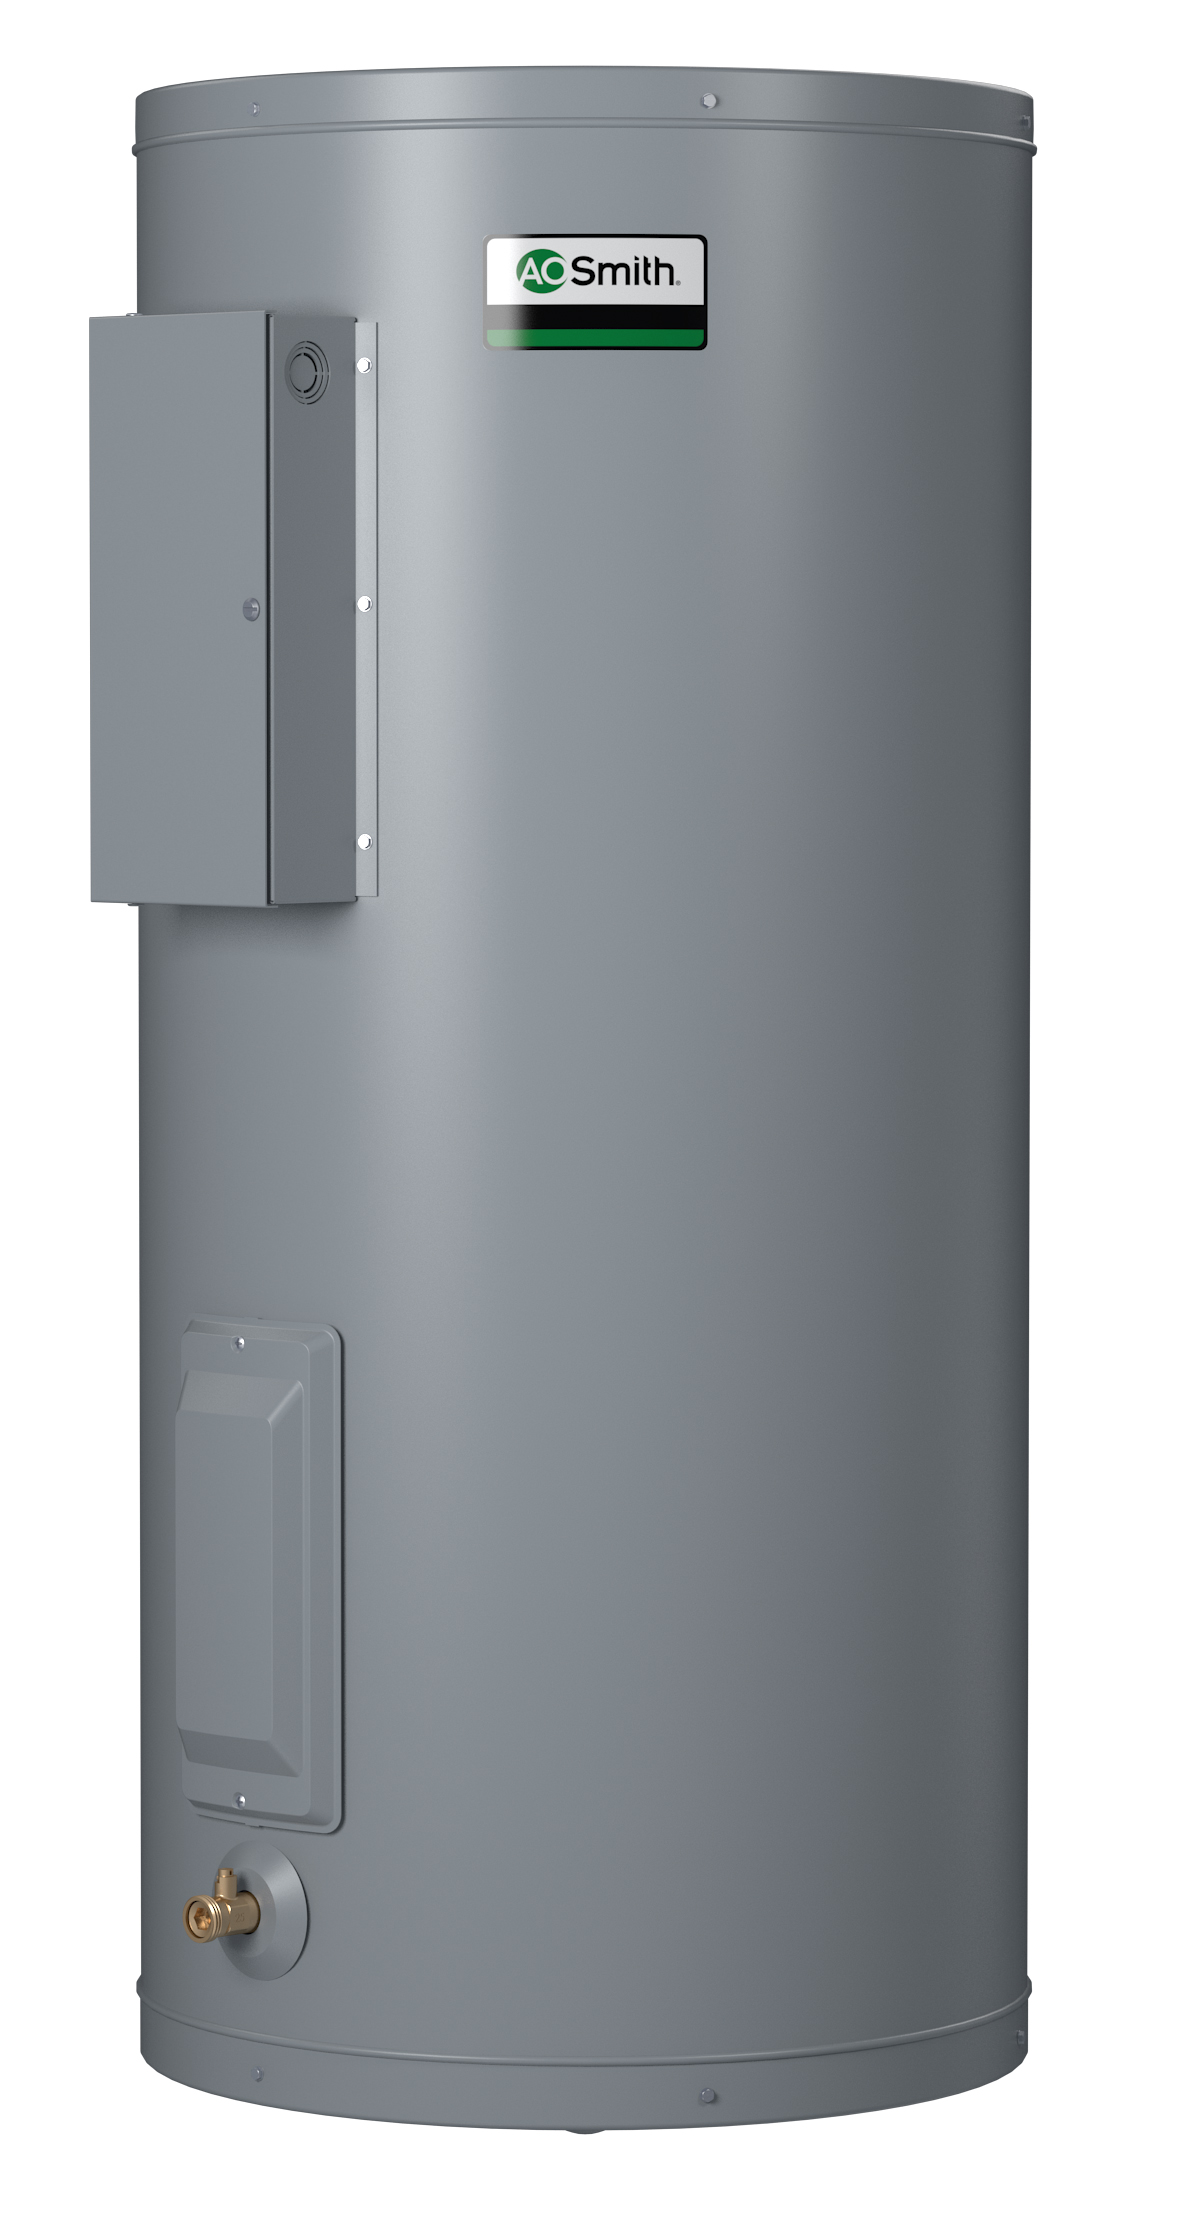 AO SMITH DEN-52D: 55 GALLONS, 10.0KW, 277 VOLT, 1 PHASE, (2-5000 WATT ELEMENTS, SIMULTANEOUS WIRING), DURA-POWER, LIGHT DUTY COMMERCIAL ELECTRIC WATER HEATER